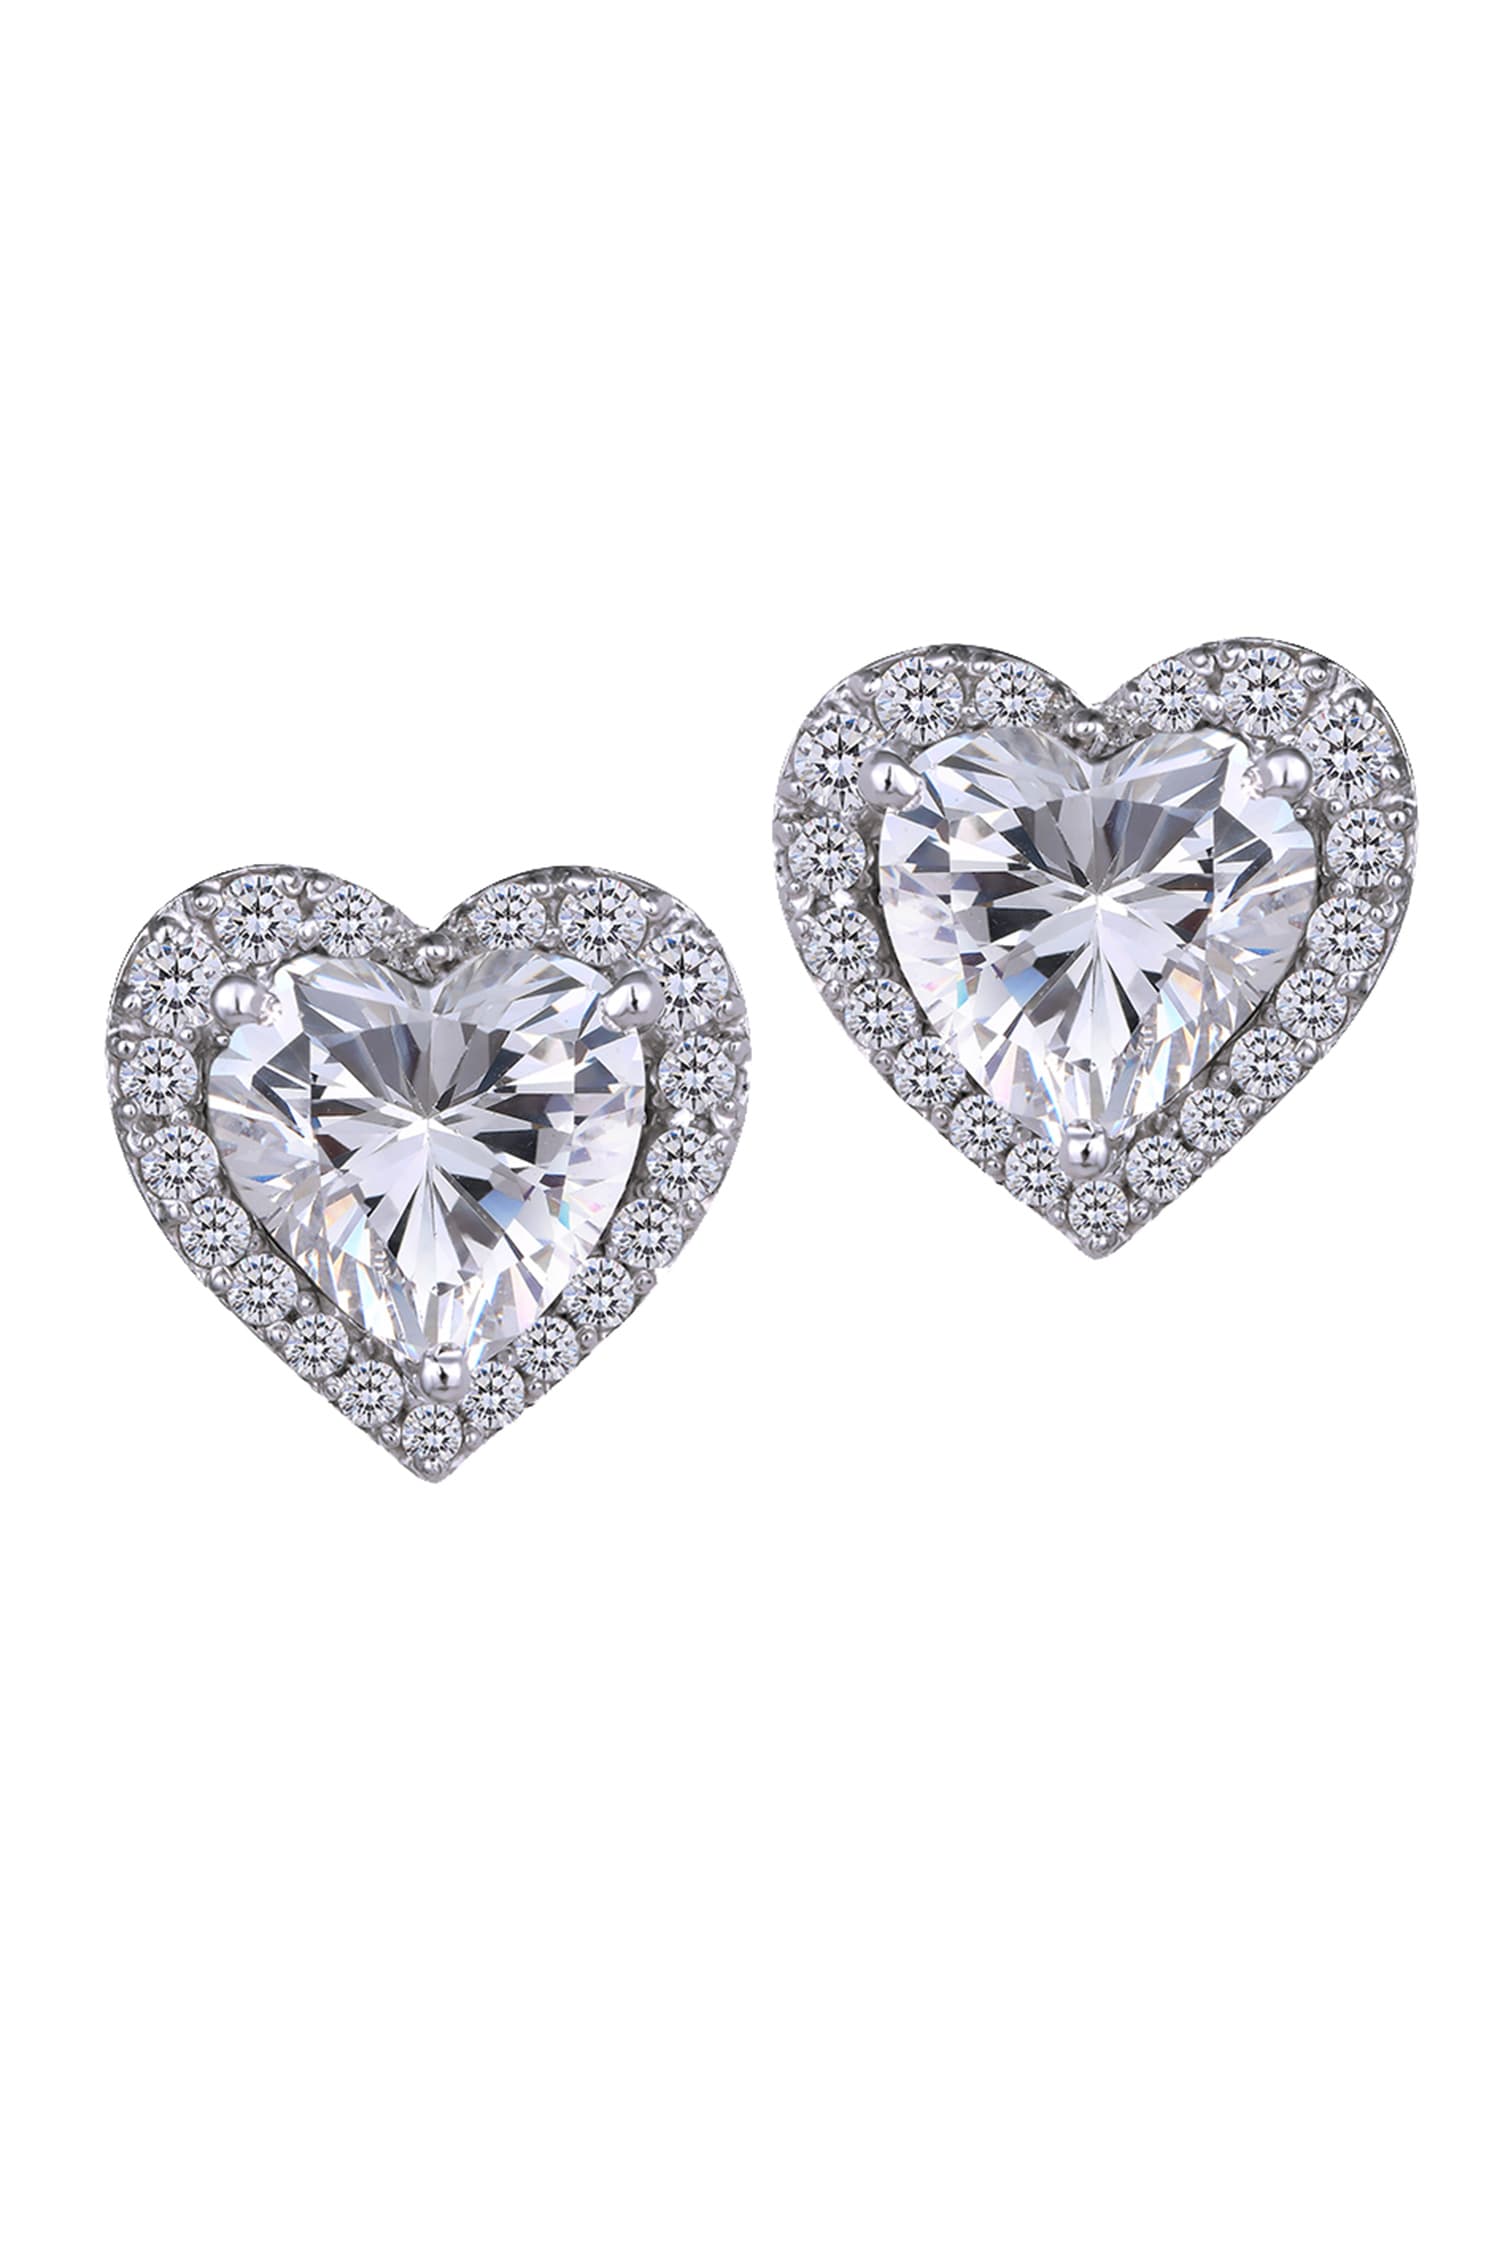 Buy Heart Shaped Embellished Studs by DIOSA PARIS JEWELLERY at Aza Fashions